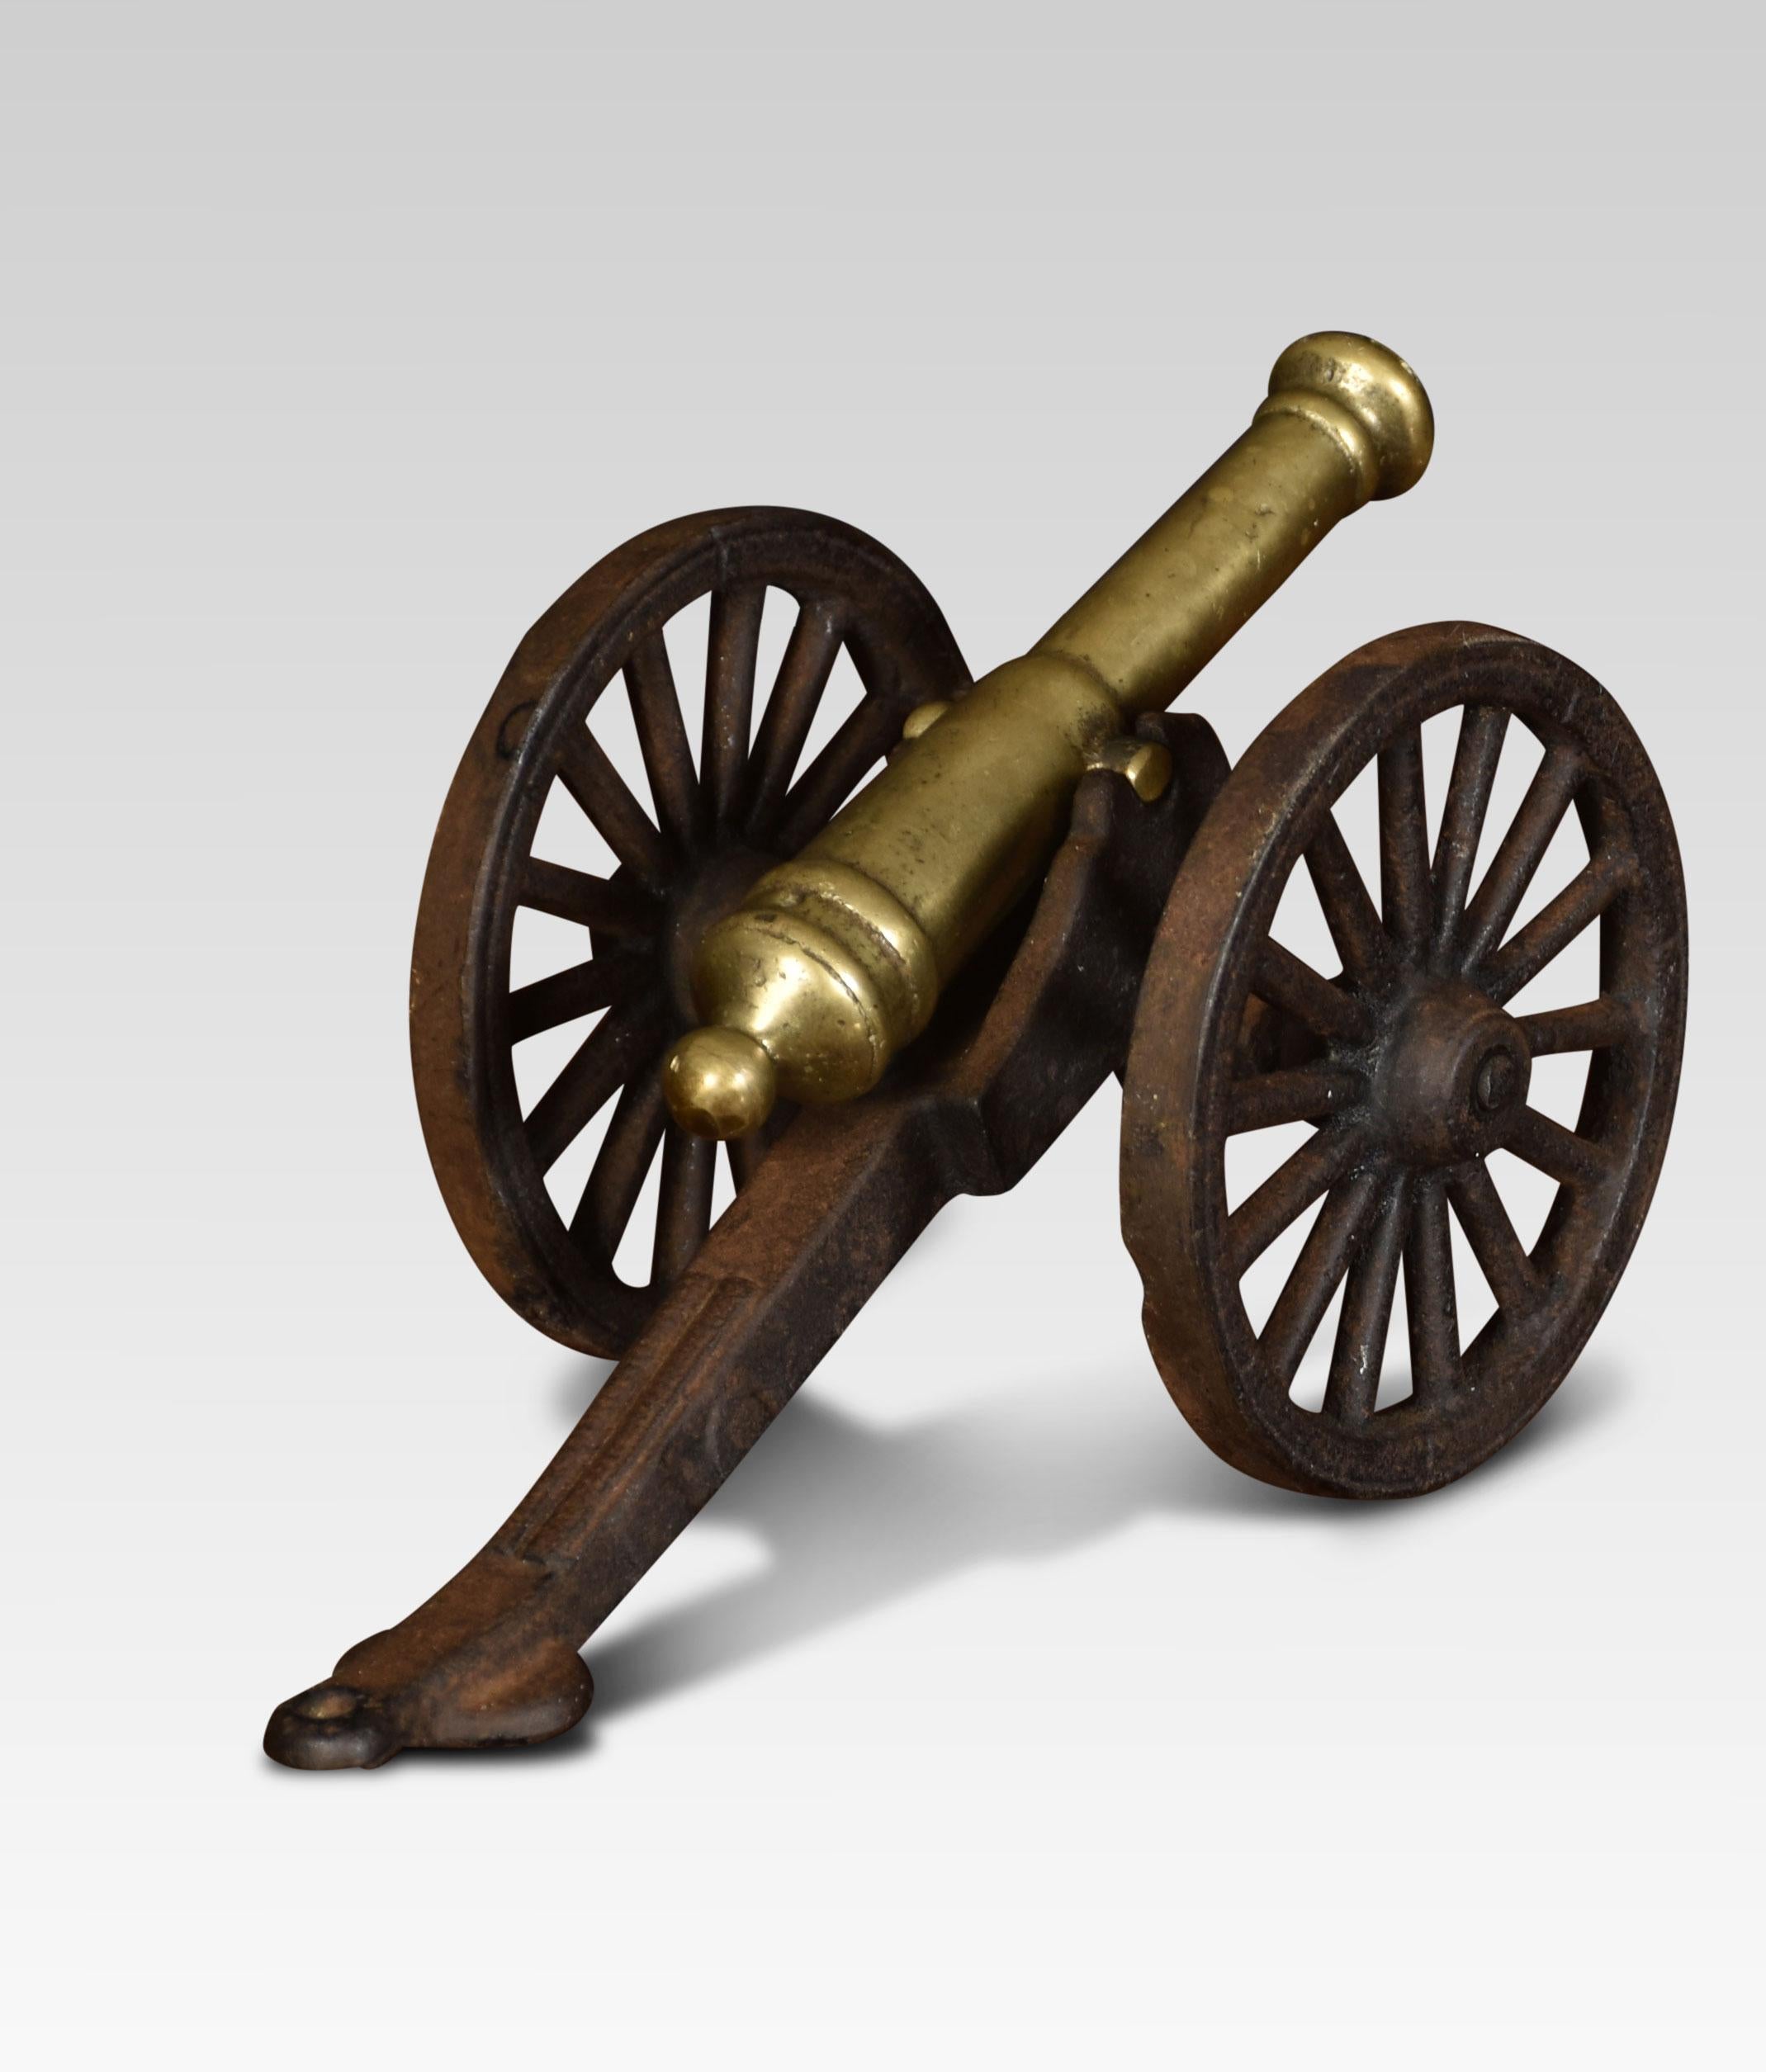 British Brass Model of a Signal Cannon